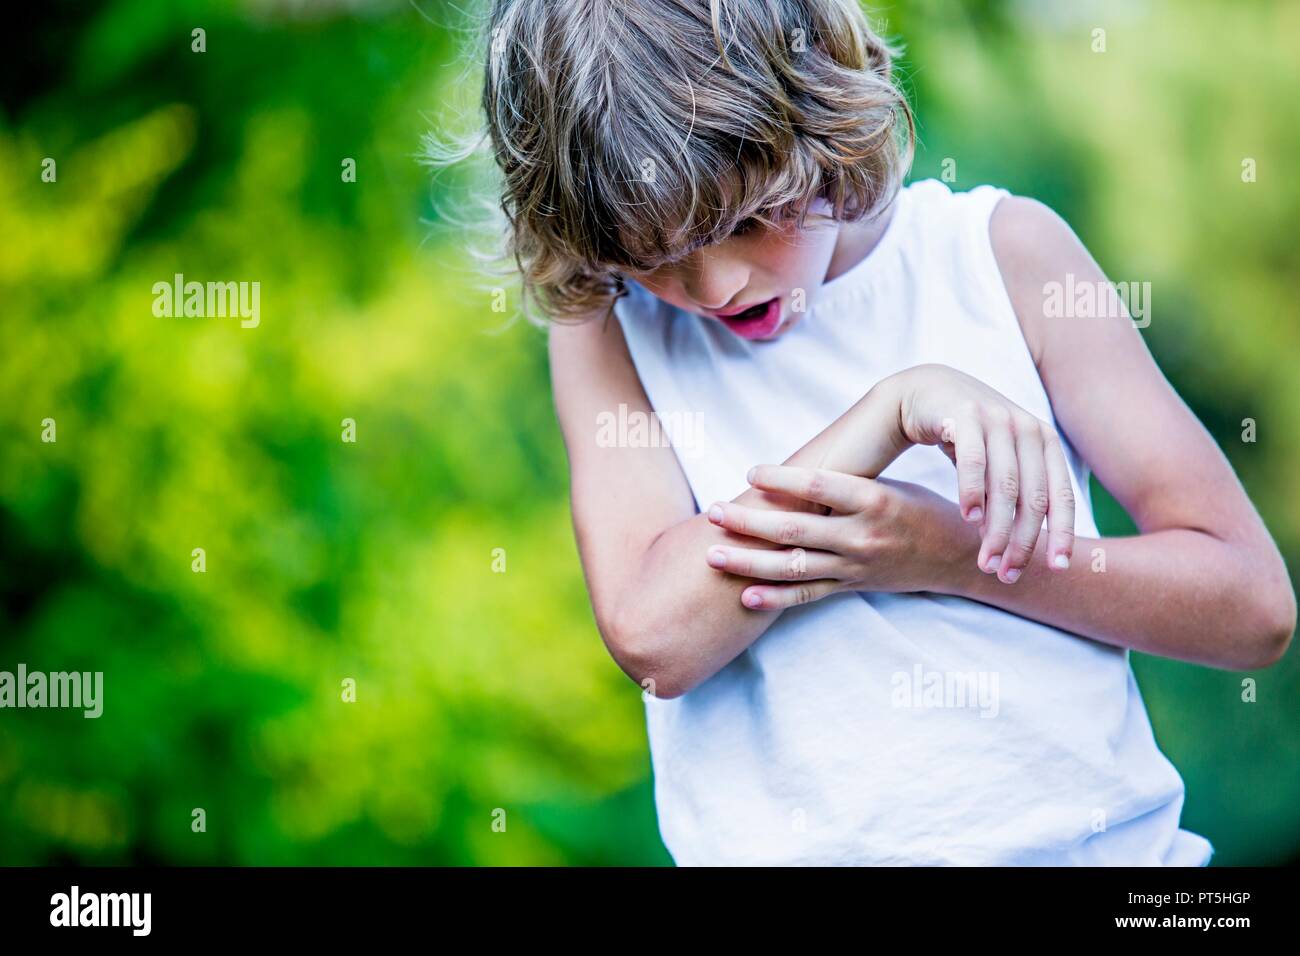 Young boy scratching arm. Stock Photo